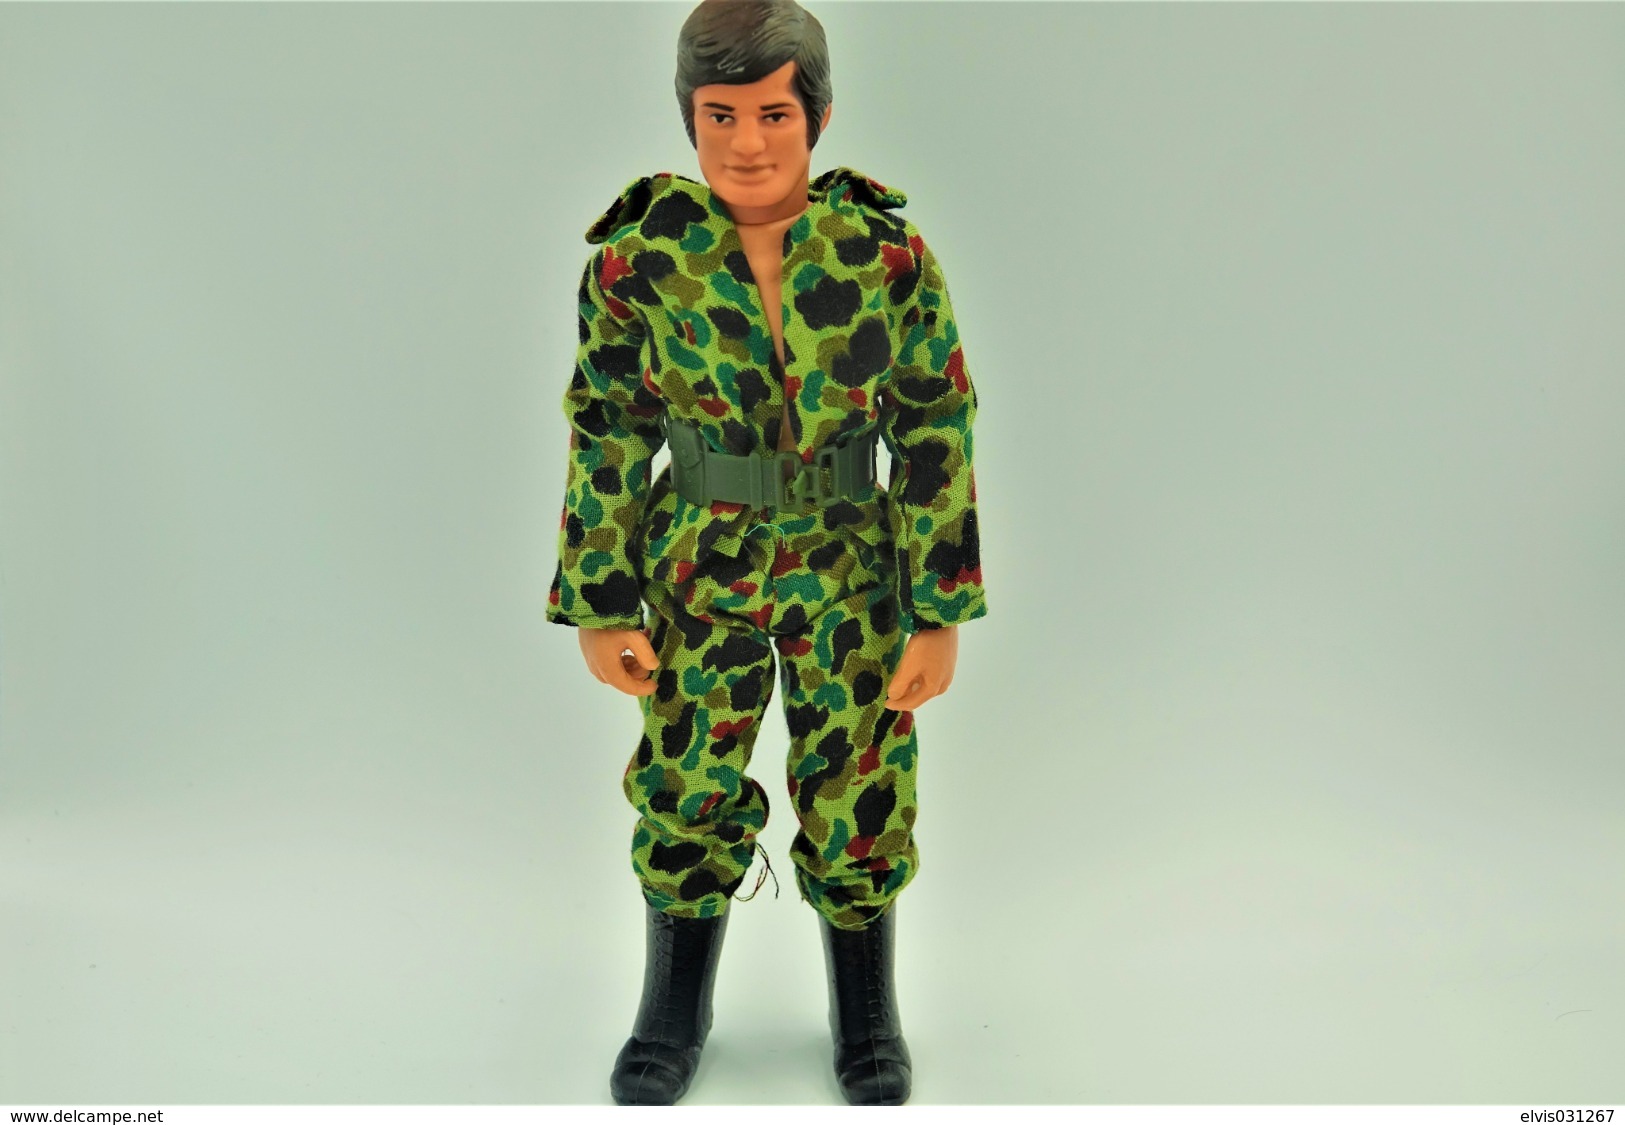 Vintage ACTION MAN TONG IND CO : SOLDIER WITH CLOTHES  - Made In HongKong Patent USA & UK - GI JOE - Action Man